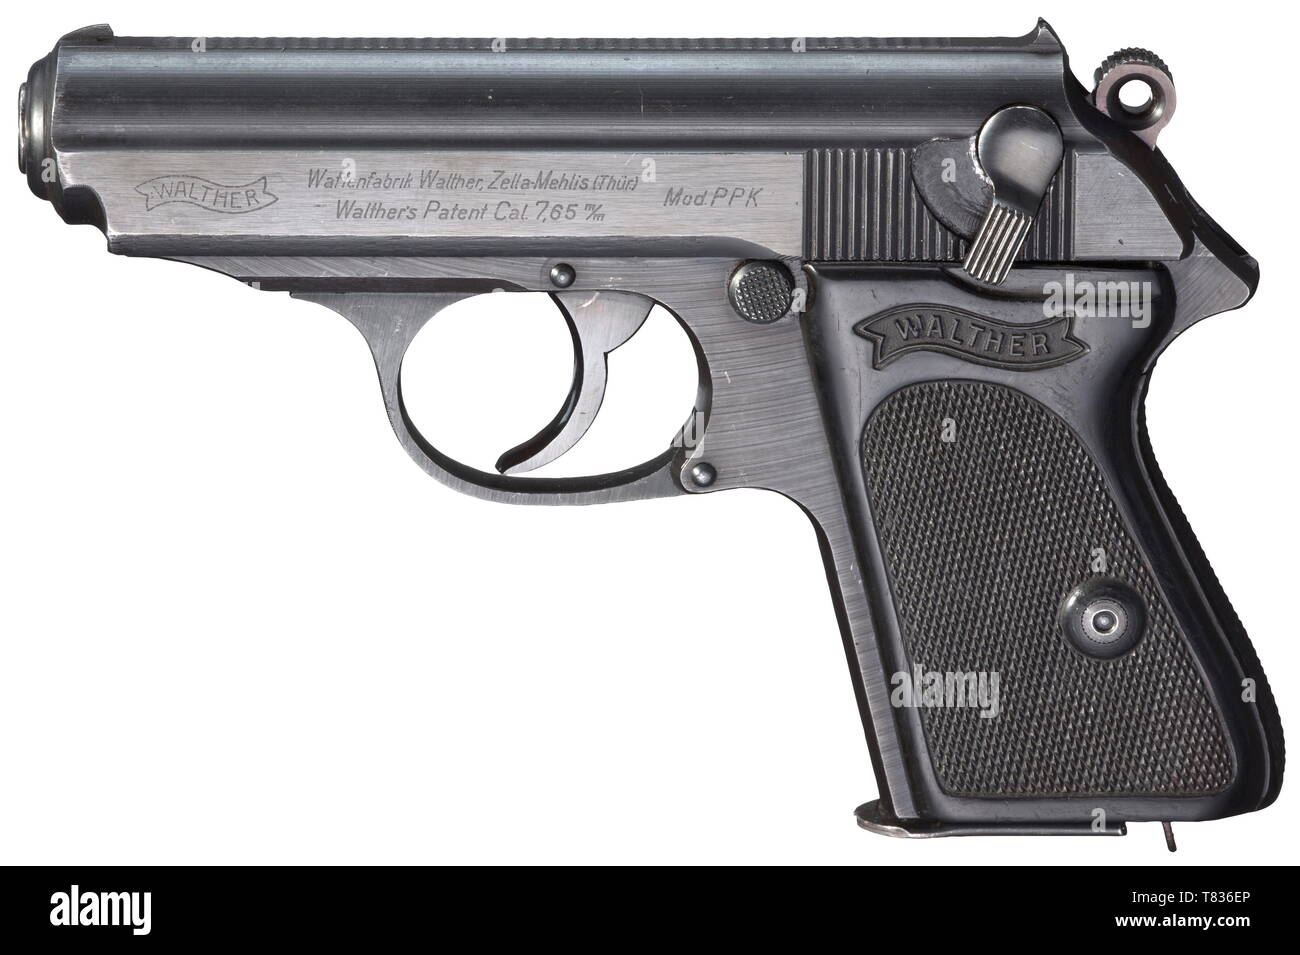 A Walther PPK ZM, Swedish hydroelectric power stations Circa 1942, 5th model, cal. 7.65 mm, no. 379003k. Matching numbers. Bright bore. Short grip spur, no heel on trigger guard/frame, traces of production. Standard inscription. On the right of slide inventory sign 'Nr 70 / STATENS VATTENFALLSVERK' for the security force of the Swedish hydroelectric power stations. Complete original finish including barrel and chamber, chamber finish with scratches. Original, black plastic grip panel. Correct magazine without extension. An extremely rare and soug, Additional-Rights-Clearance-Info-Not-Available Stock Photo